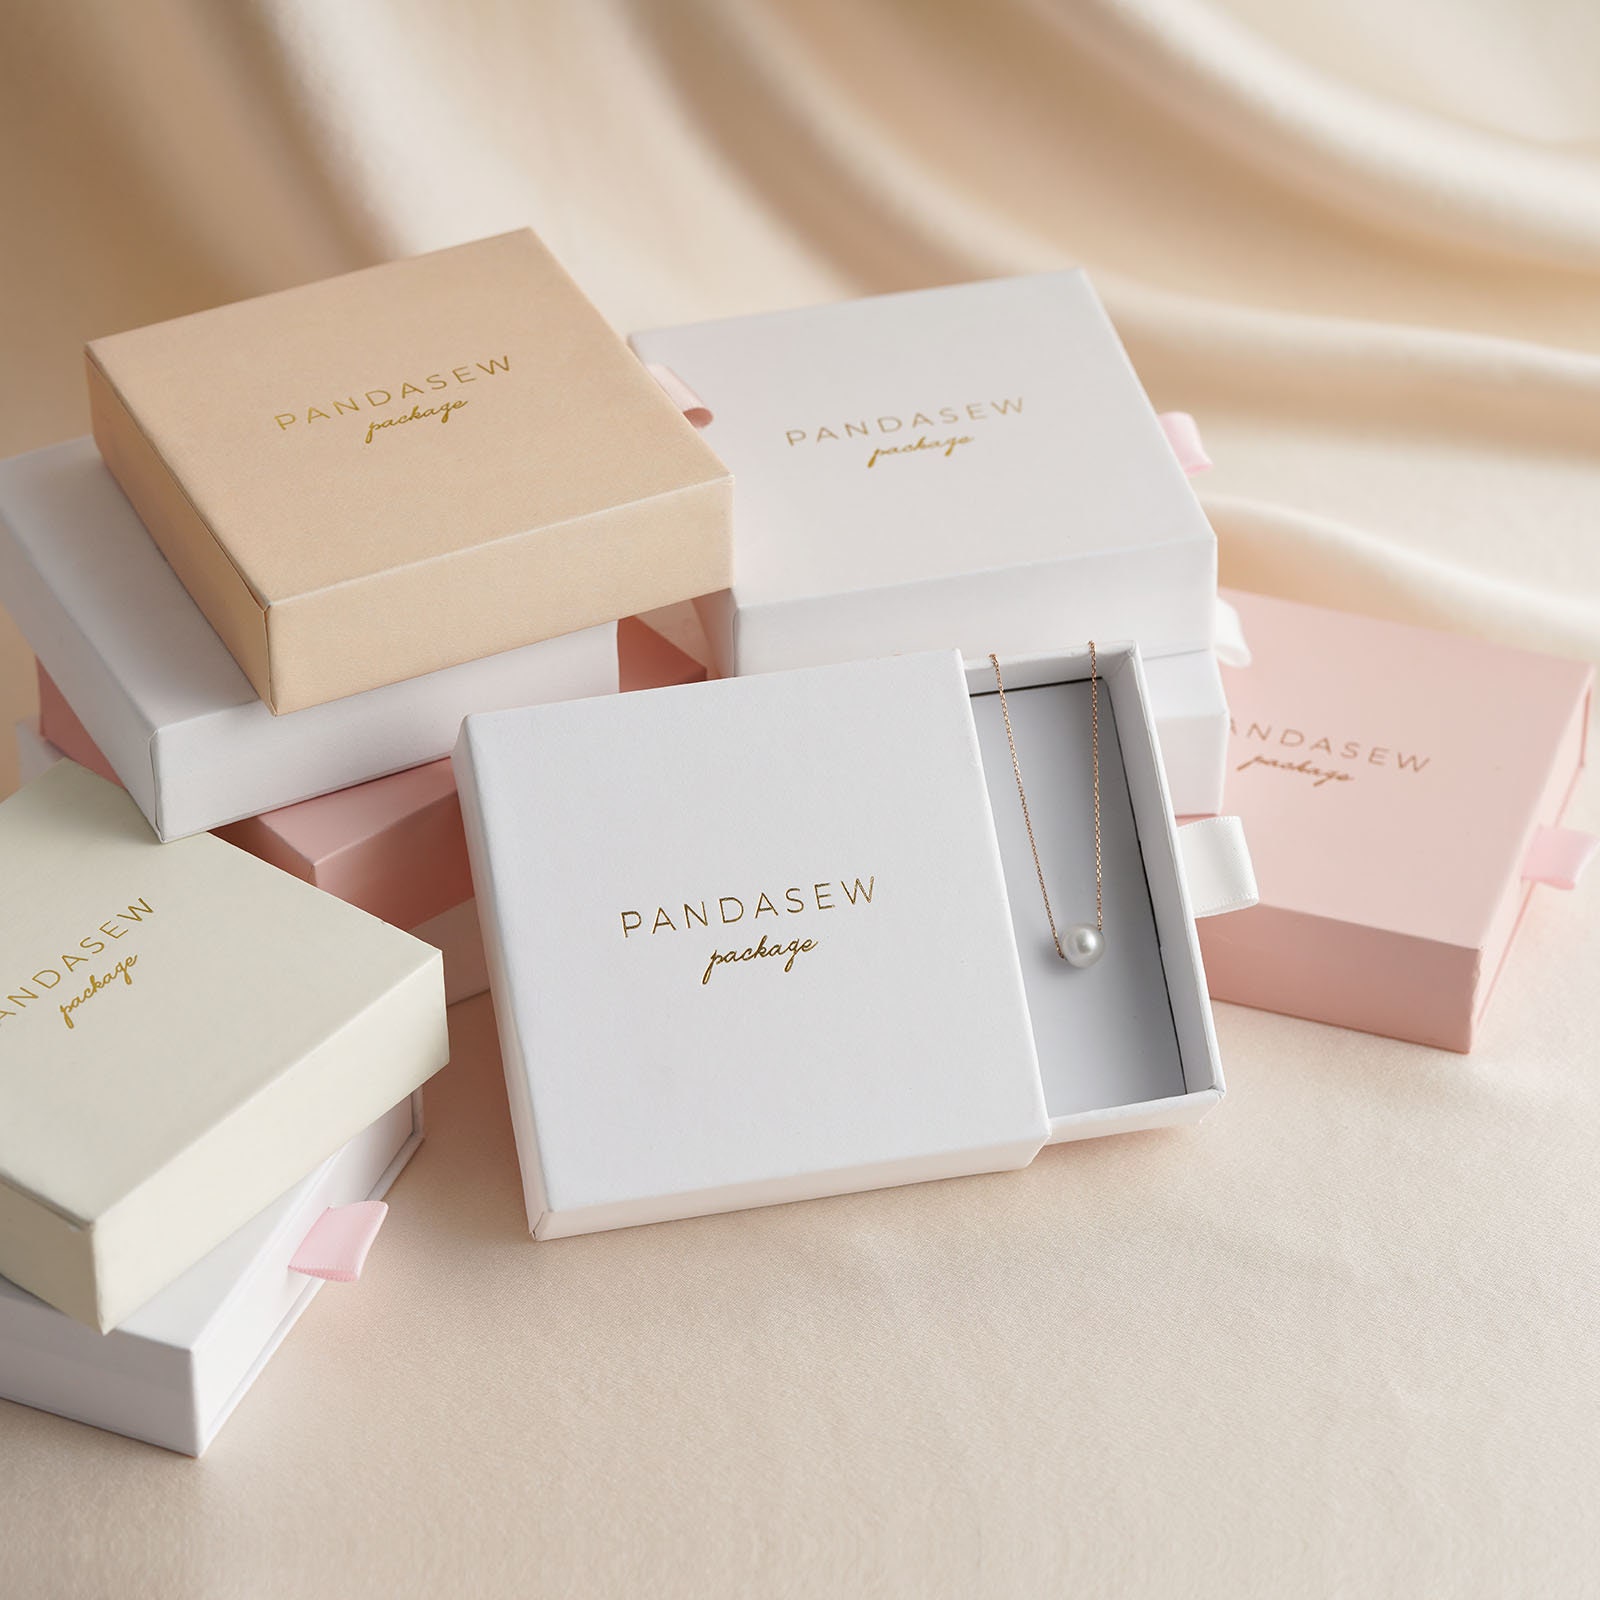 Enchanting Custom jewelry Packaging to show off products